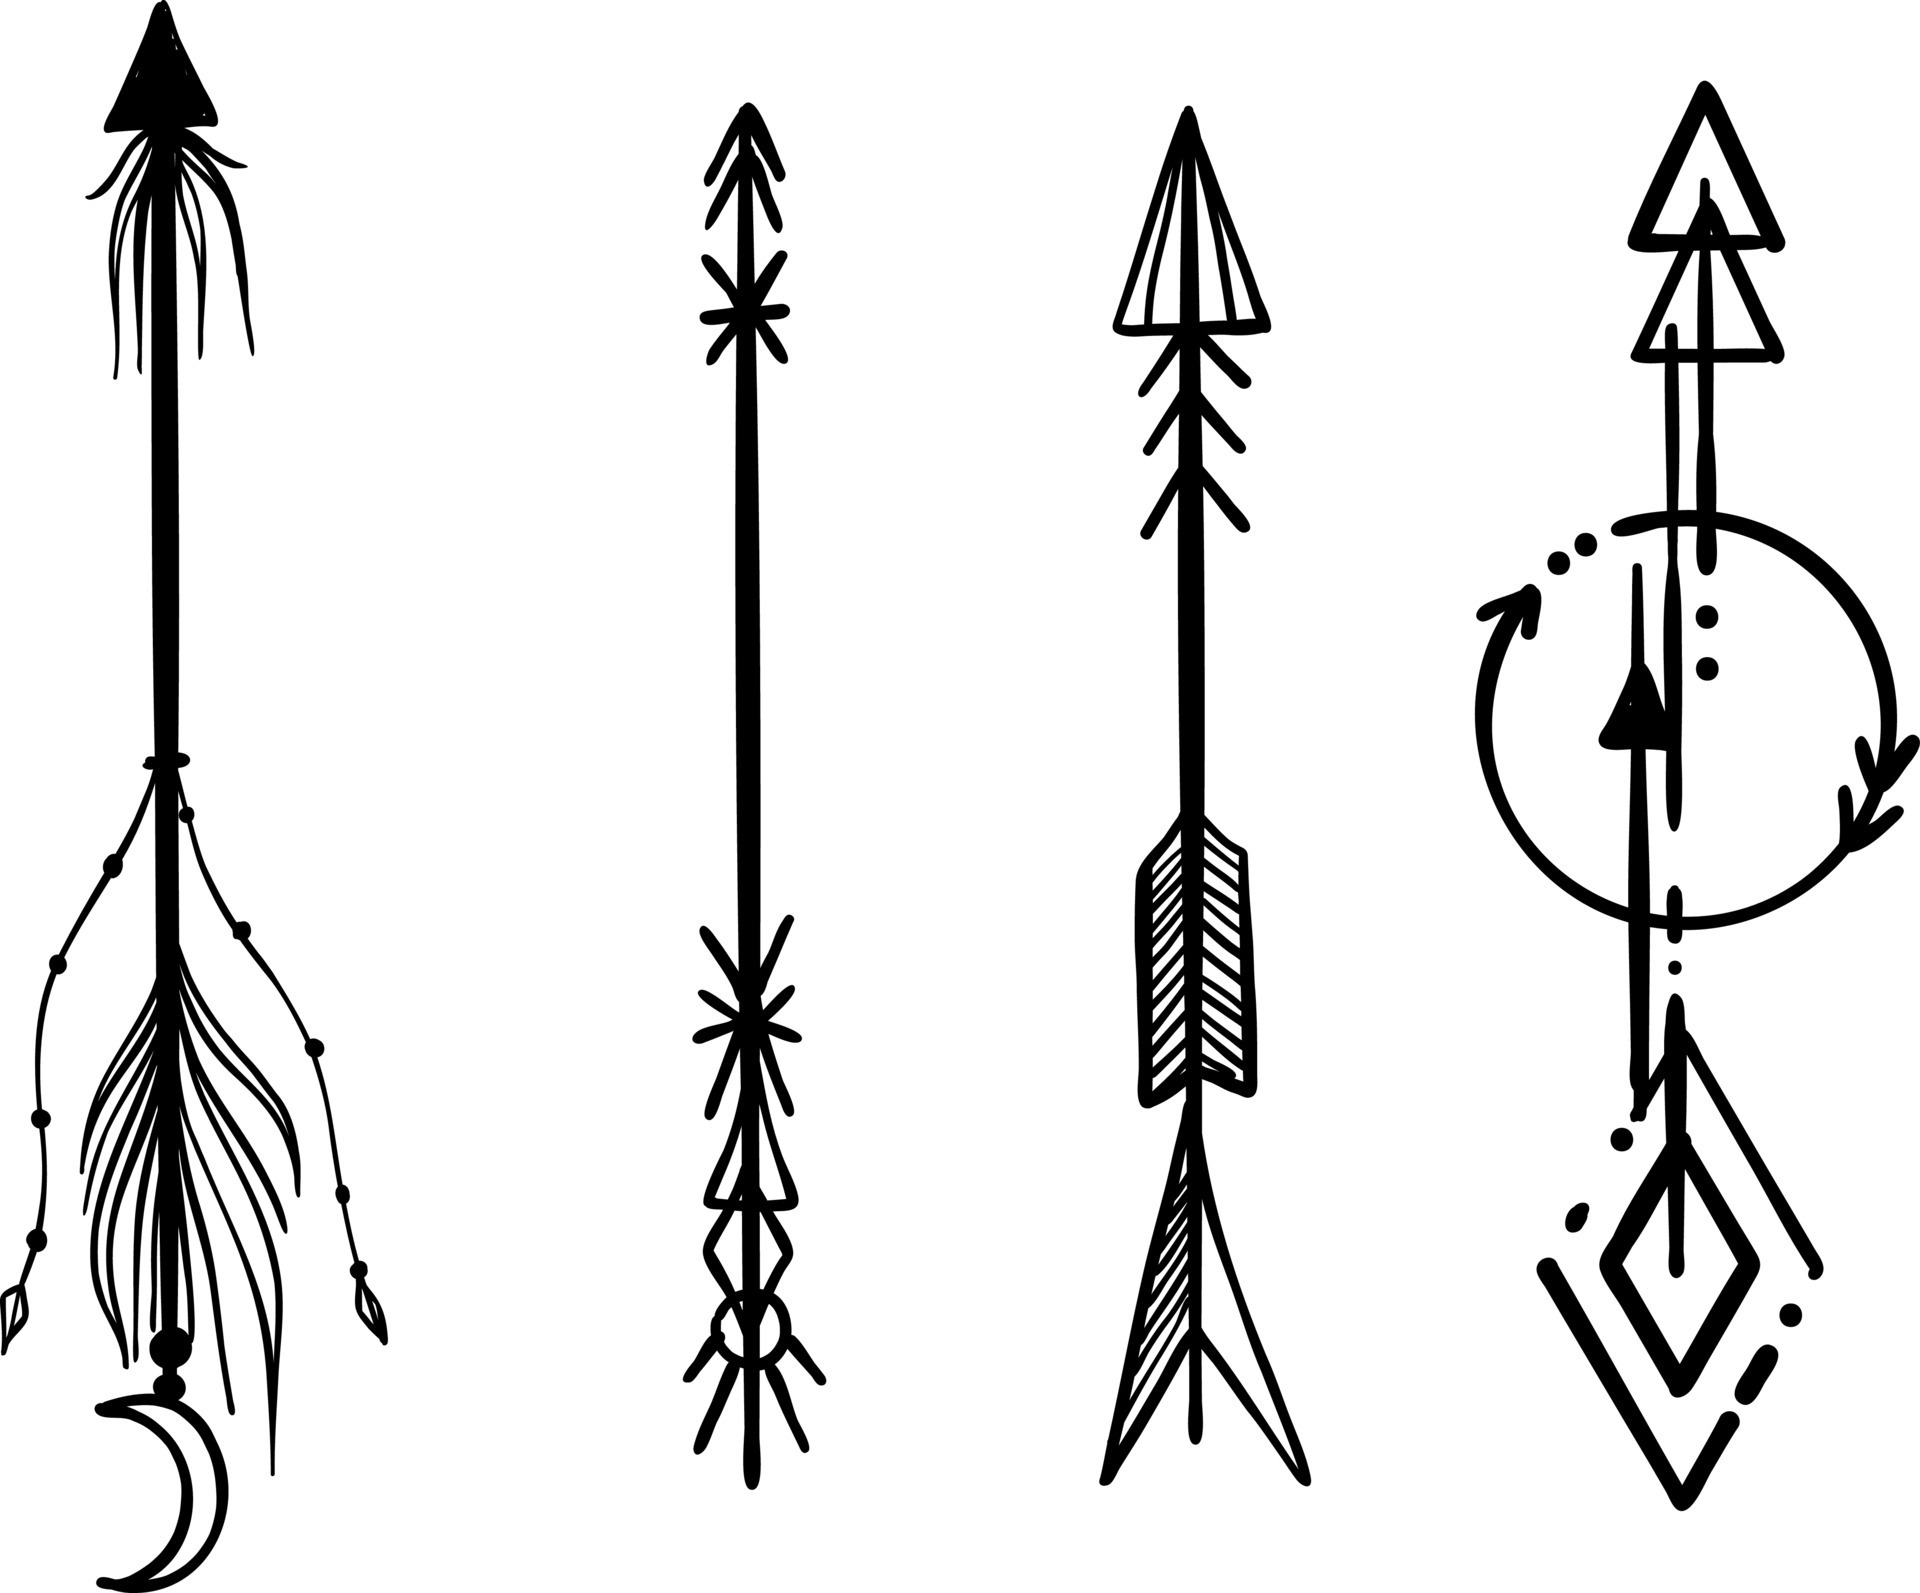 arrow ornament vector illustration in black and white colors 16837379 ...